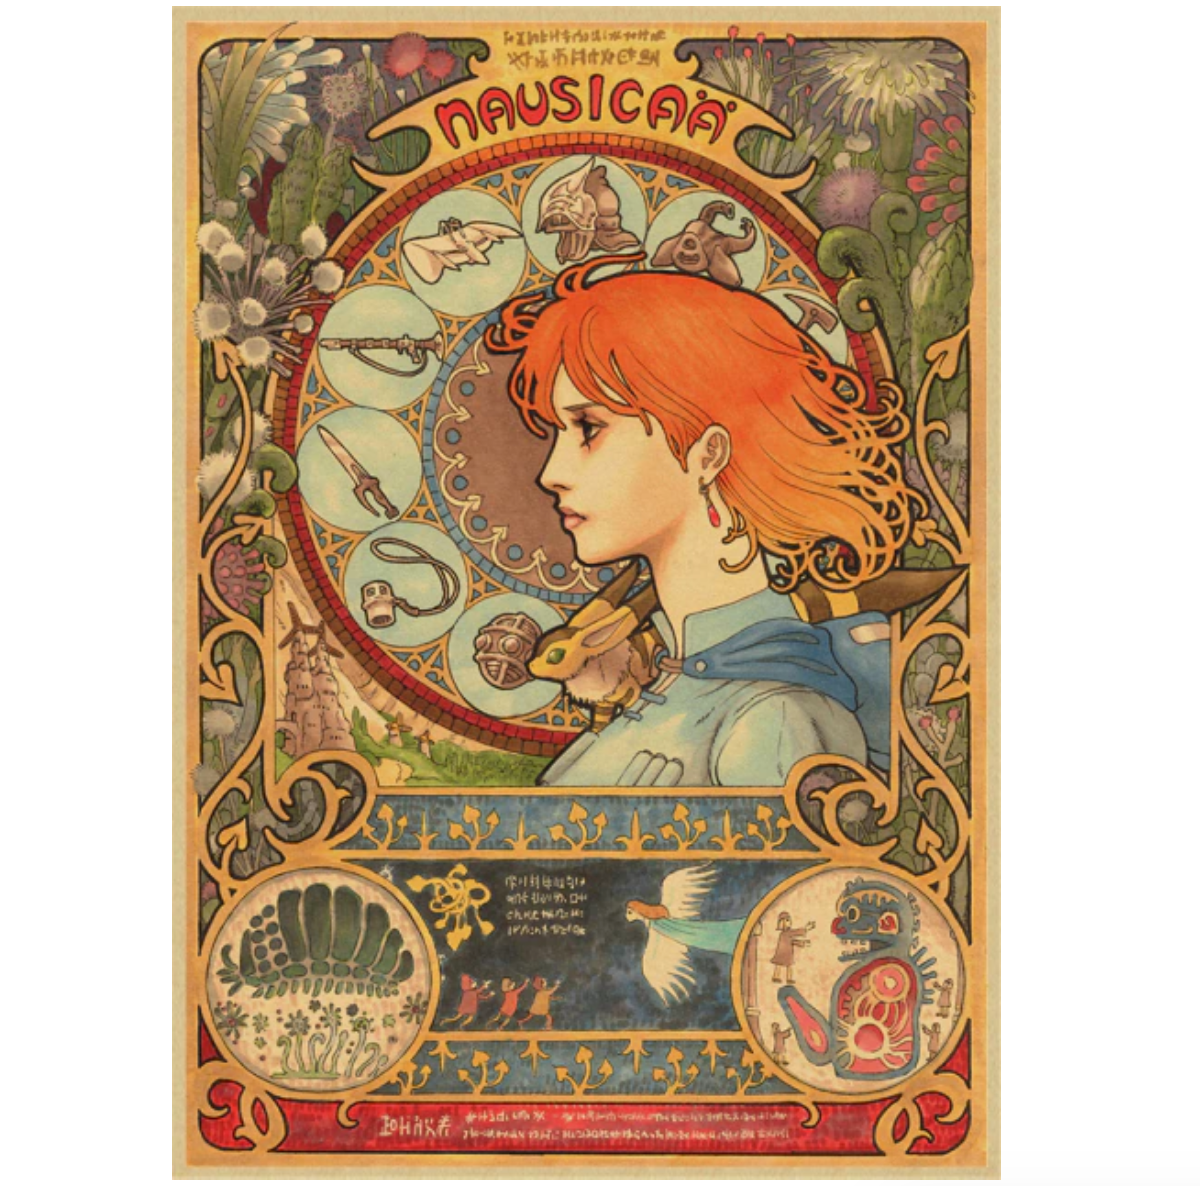 Studio Ghibli Poster Set - Character Montage Collection